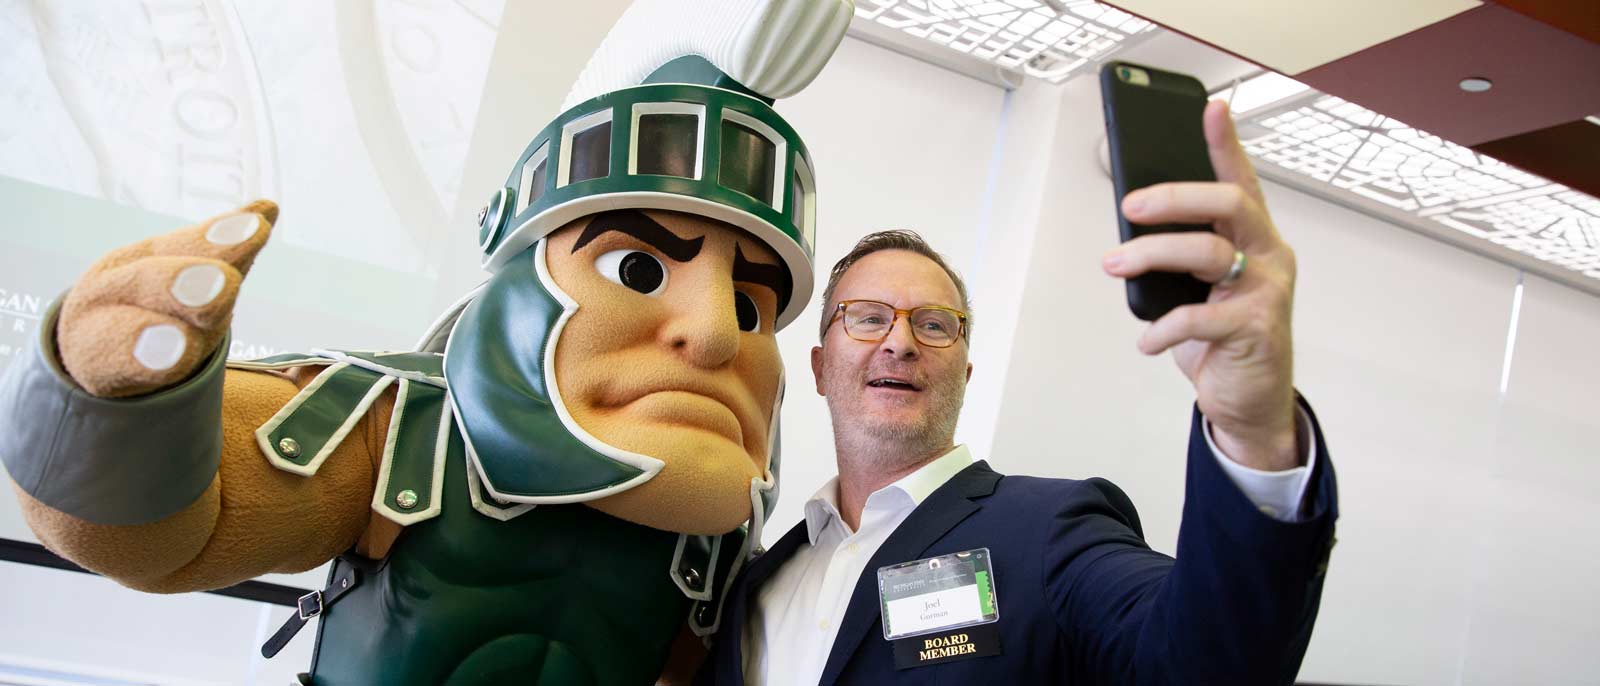 Detroit Executive Forum Board Member takes a selfie with Sparty